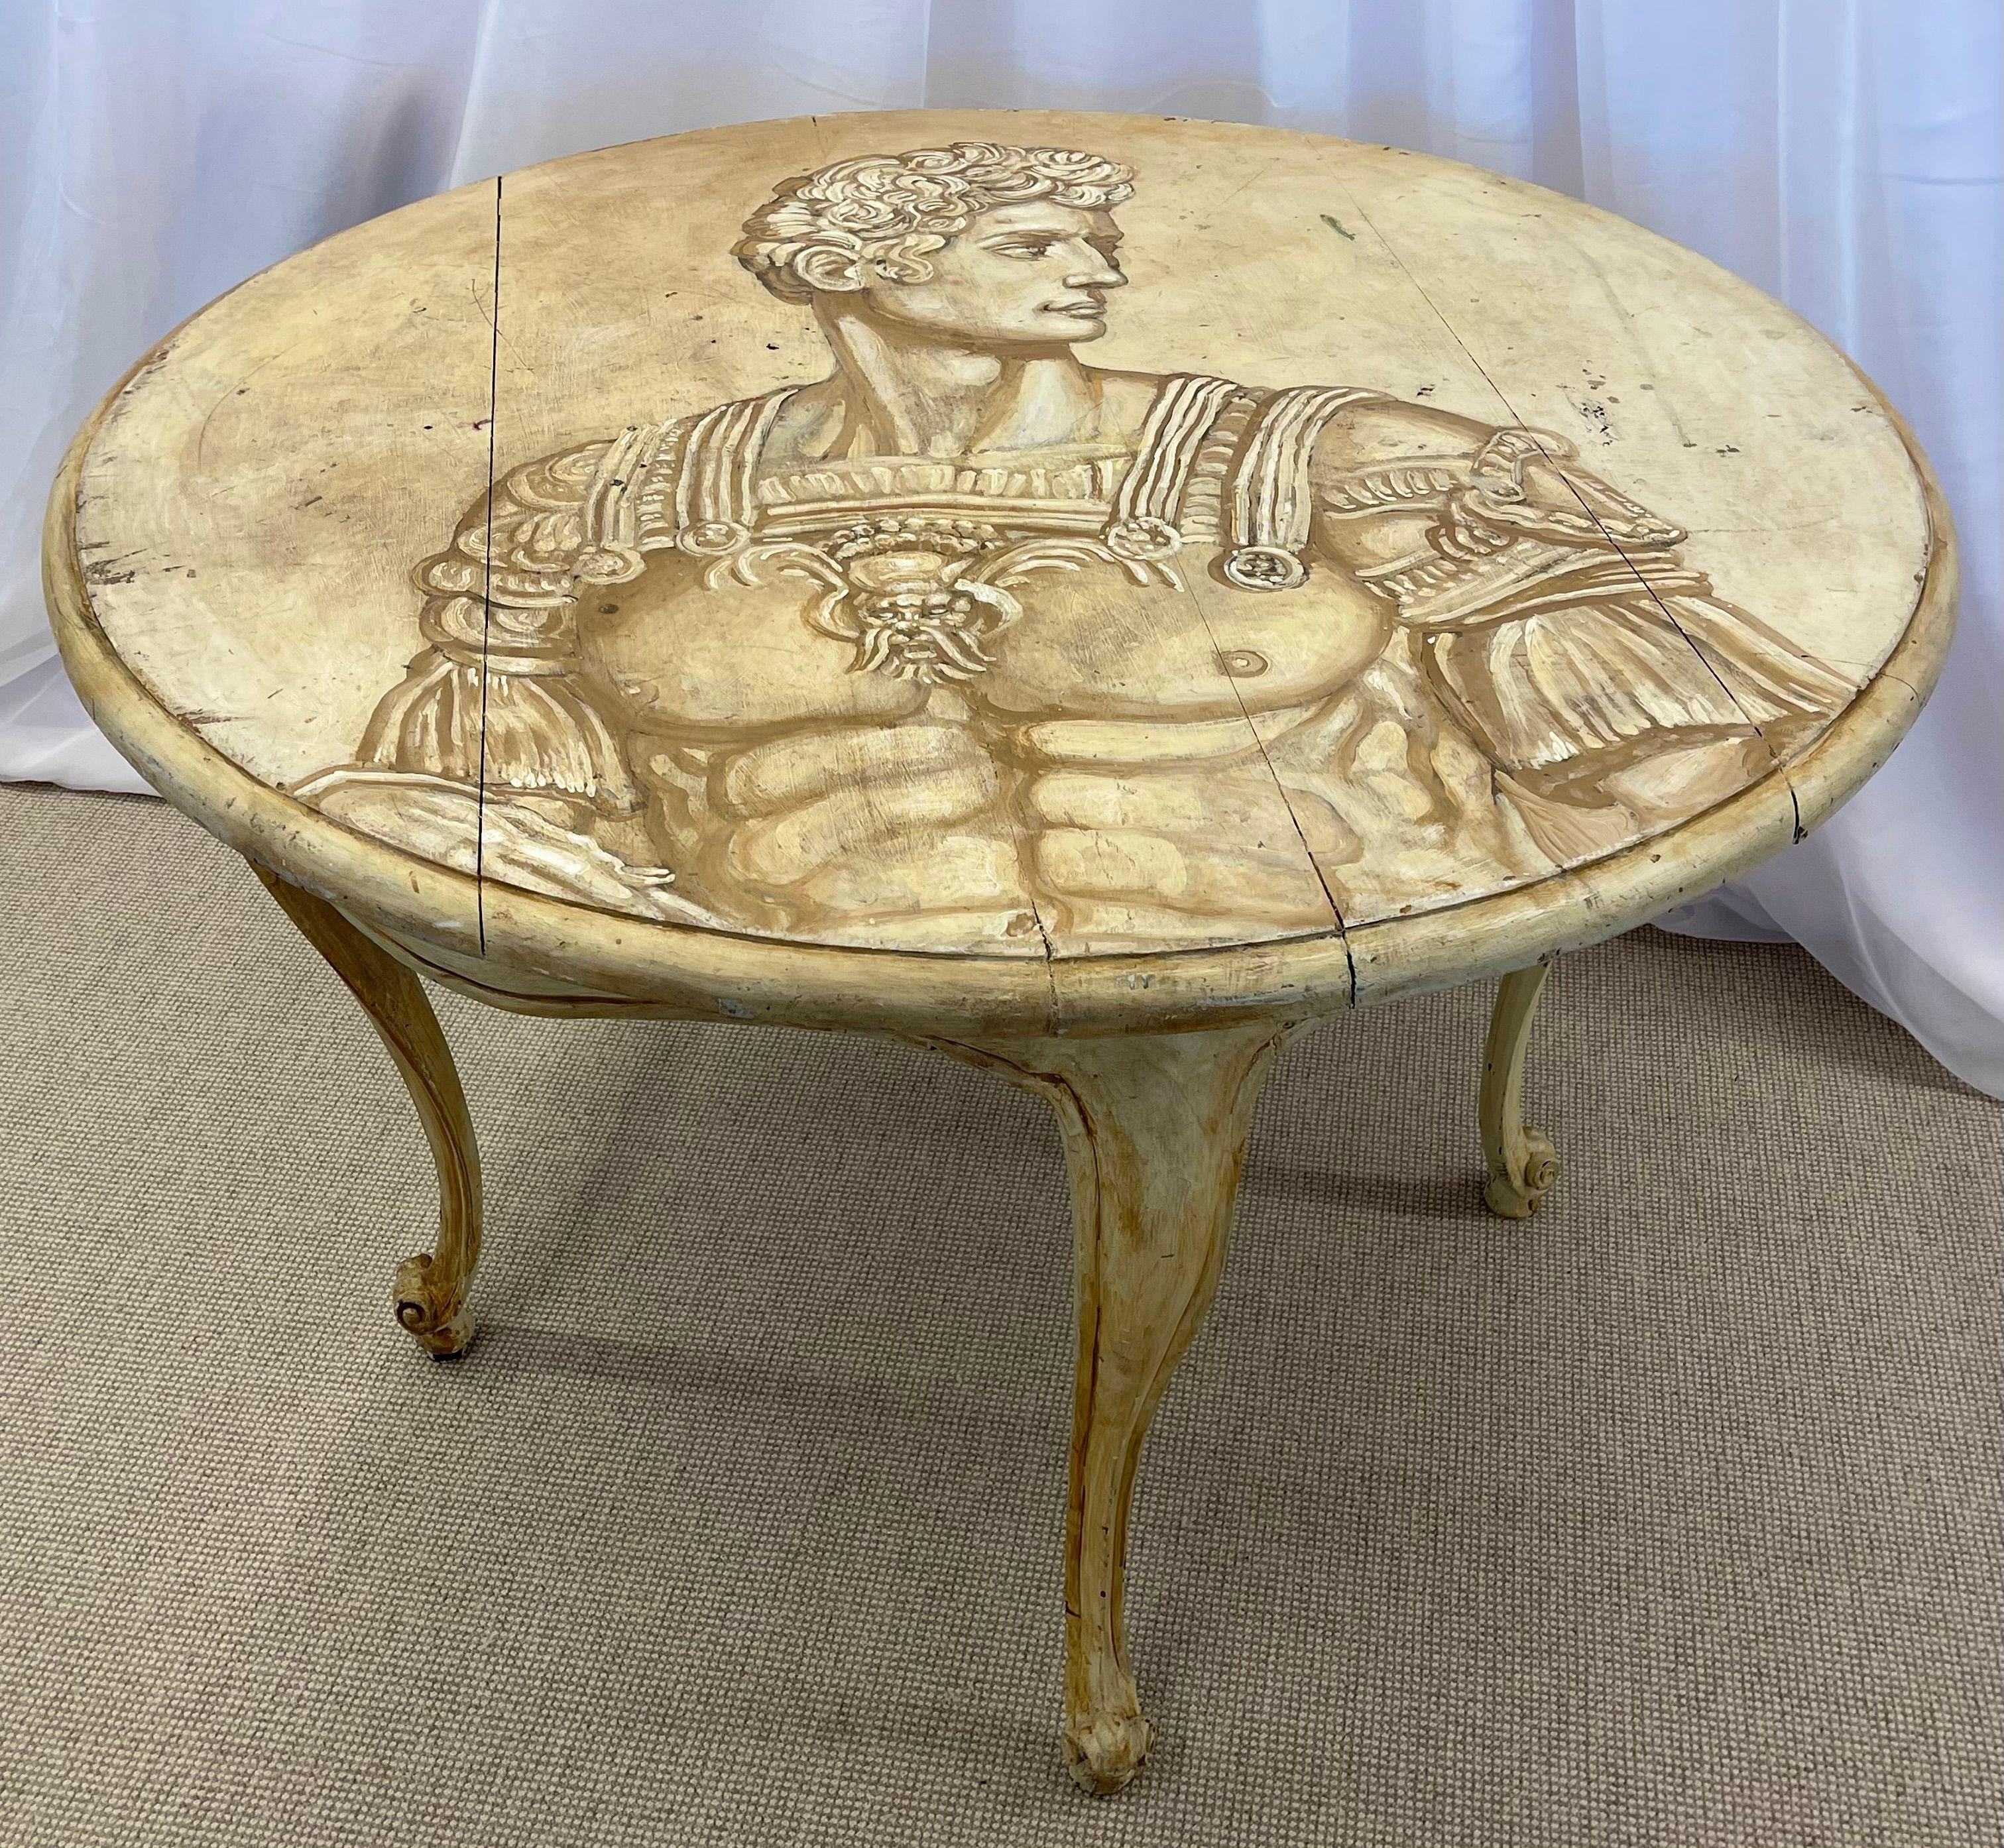 Piero Fornasetti Style Mid Century Modern Center Table, Swedish in form. Part of our extensive collection of over forty dining tables and chair sets as seen on this site, thus why we are referred to as the King of Dining rooms.

This stunning center